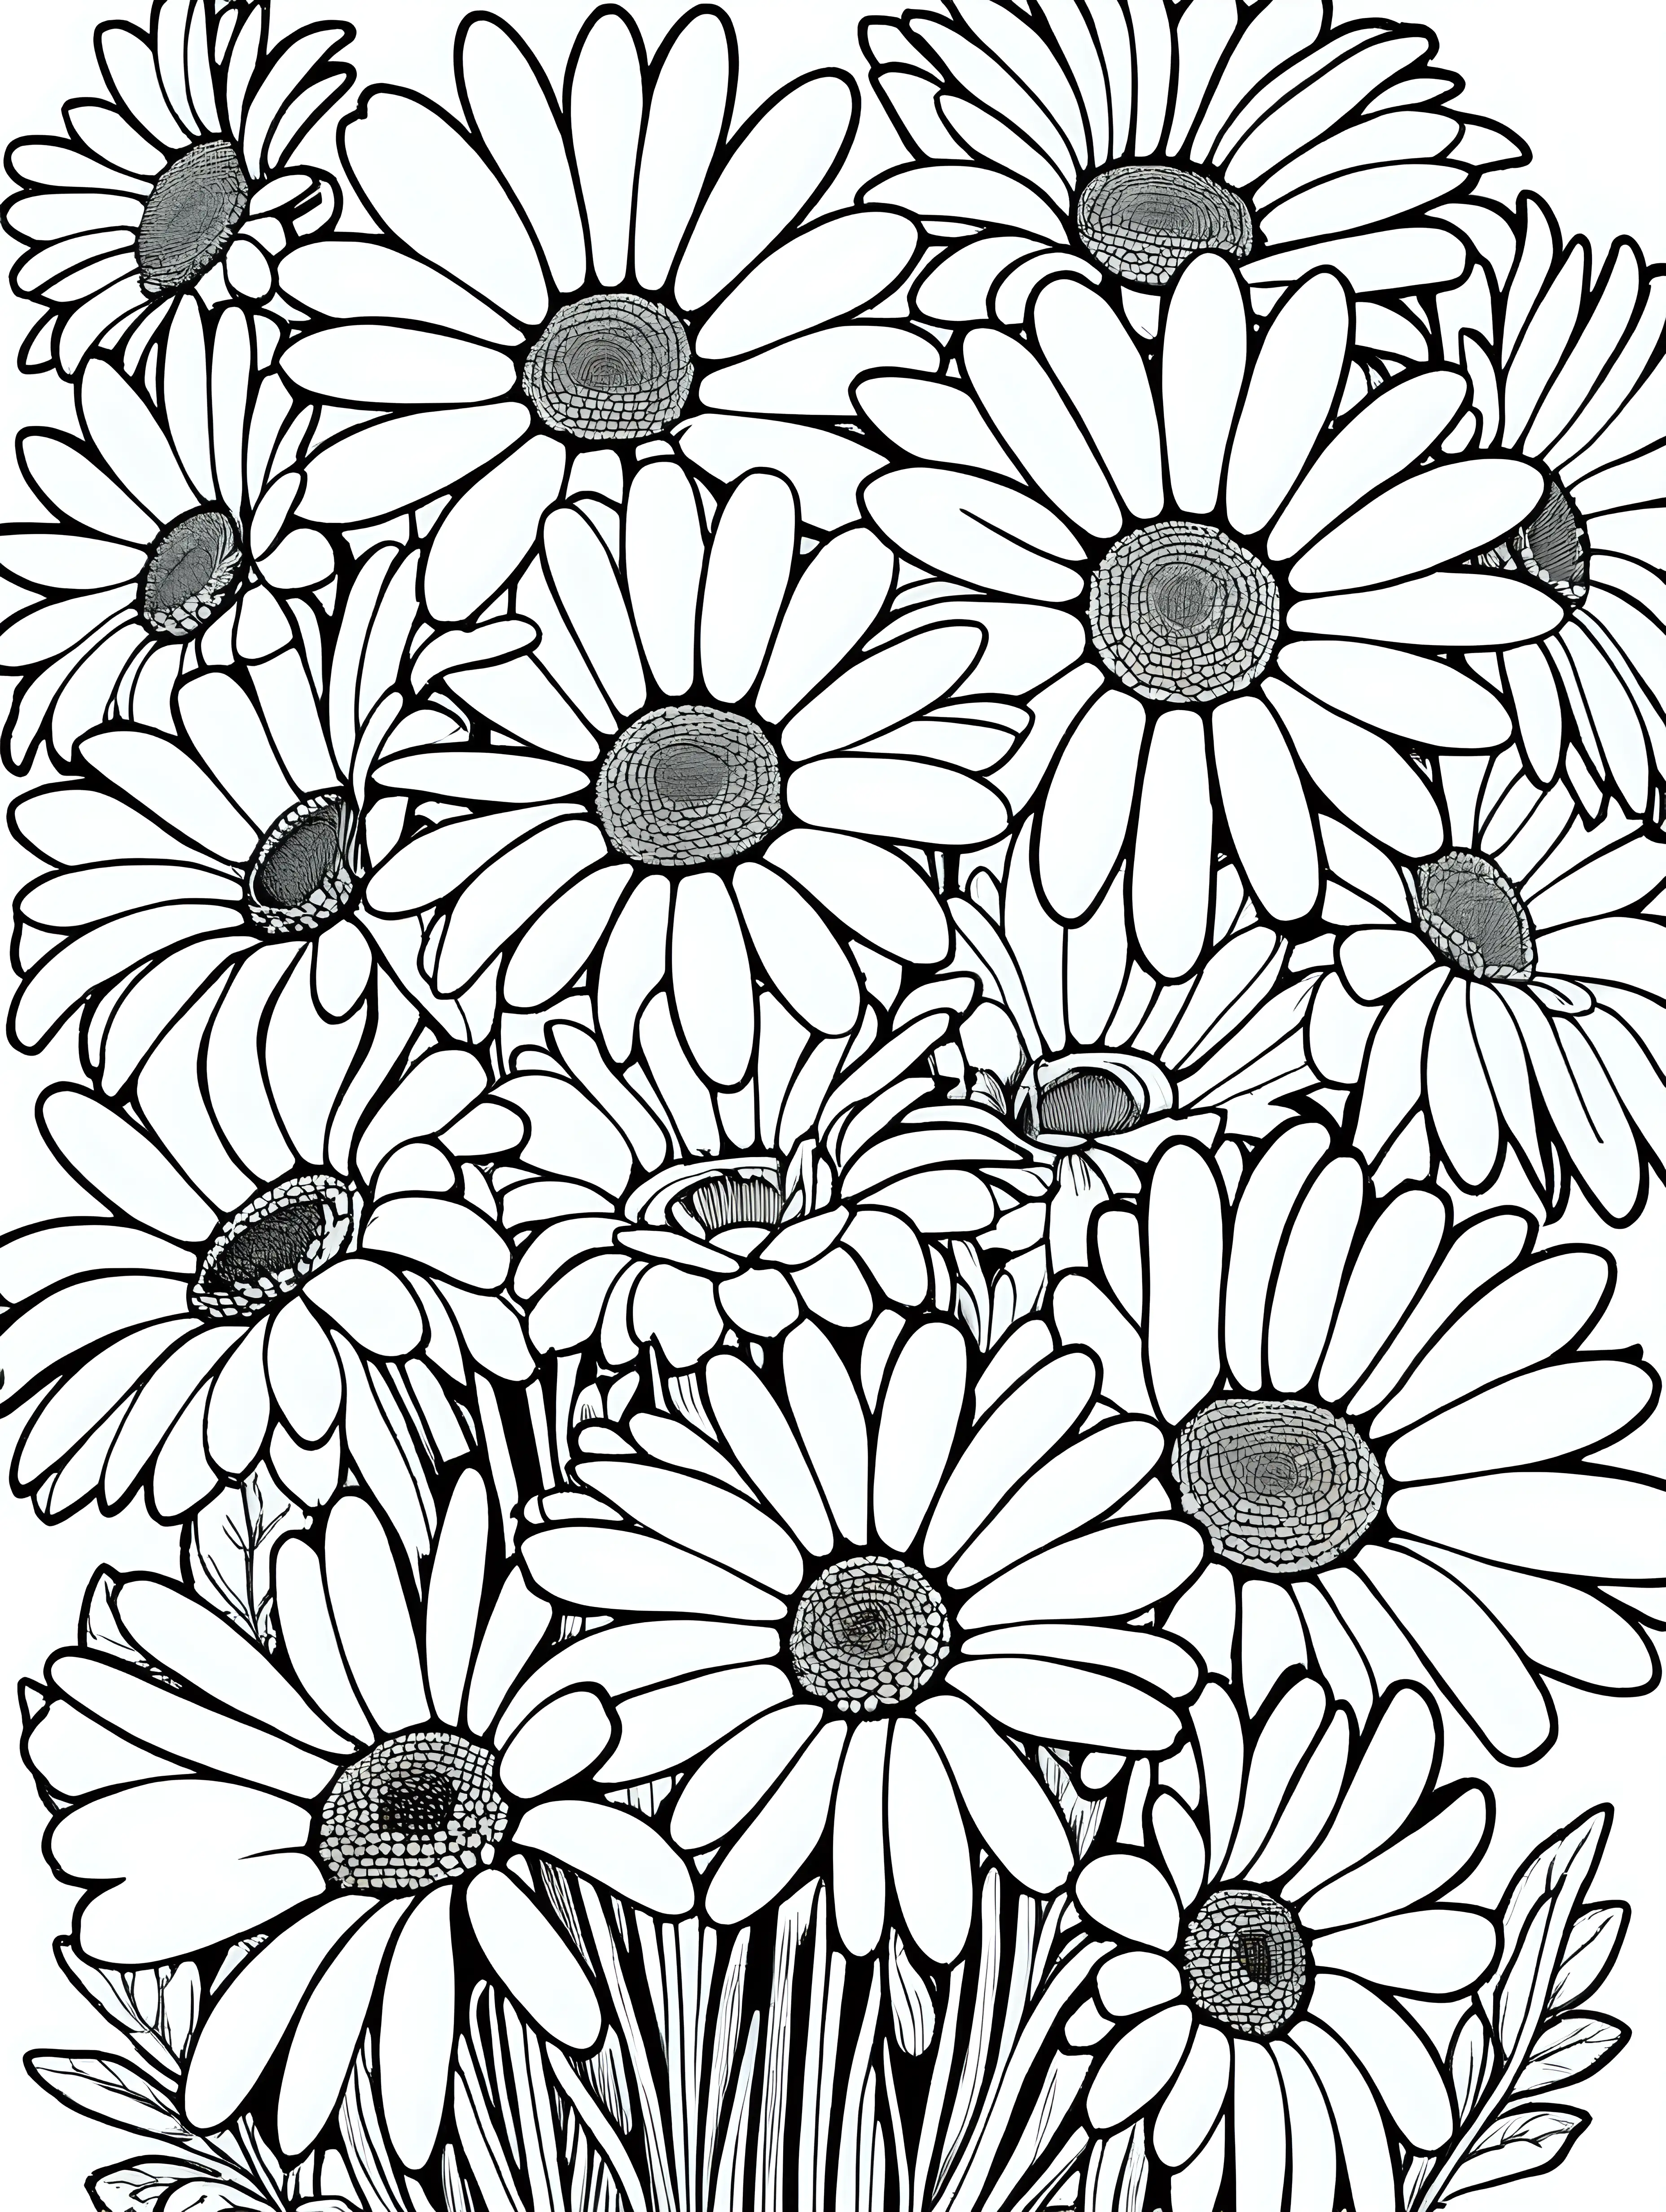 Cartoon Style Daisy Flowers Coloring Page